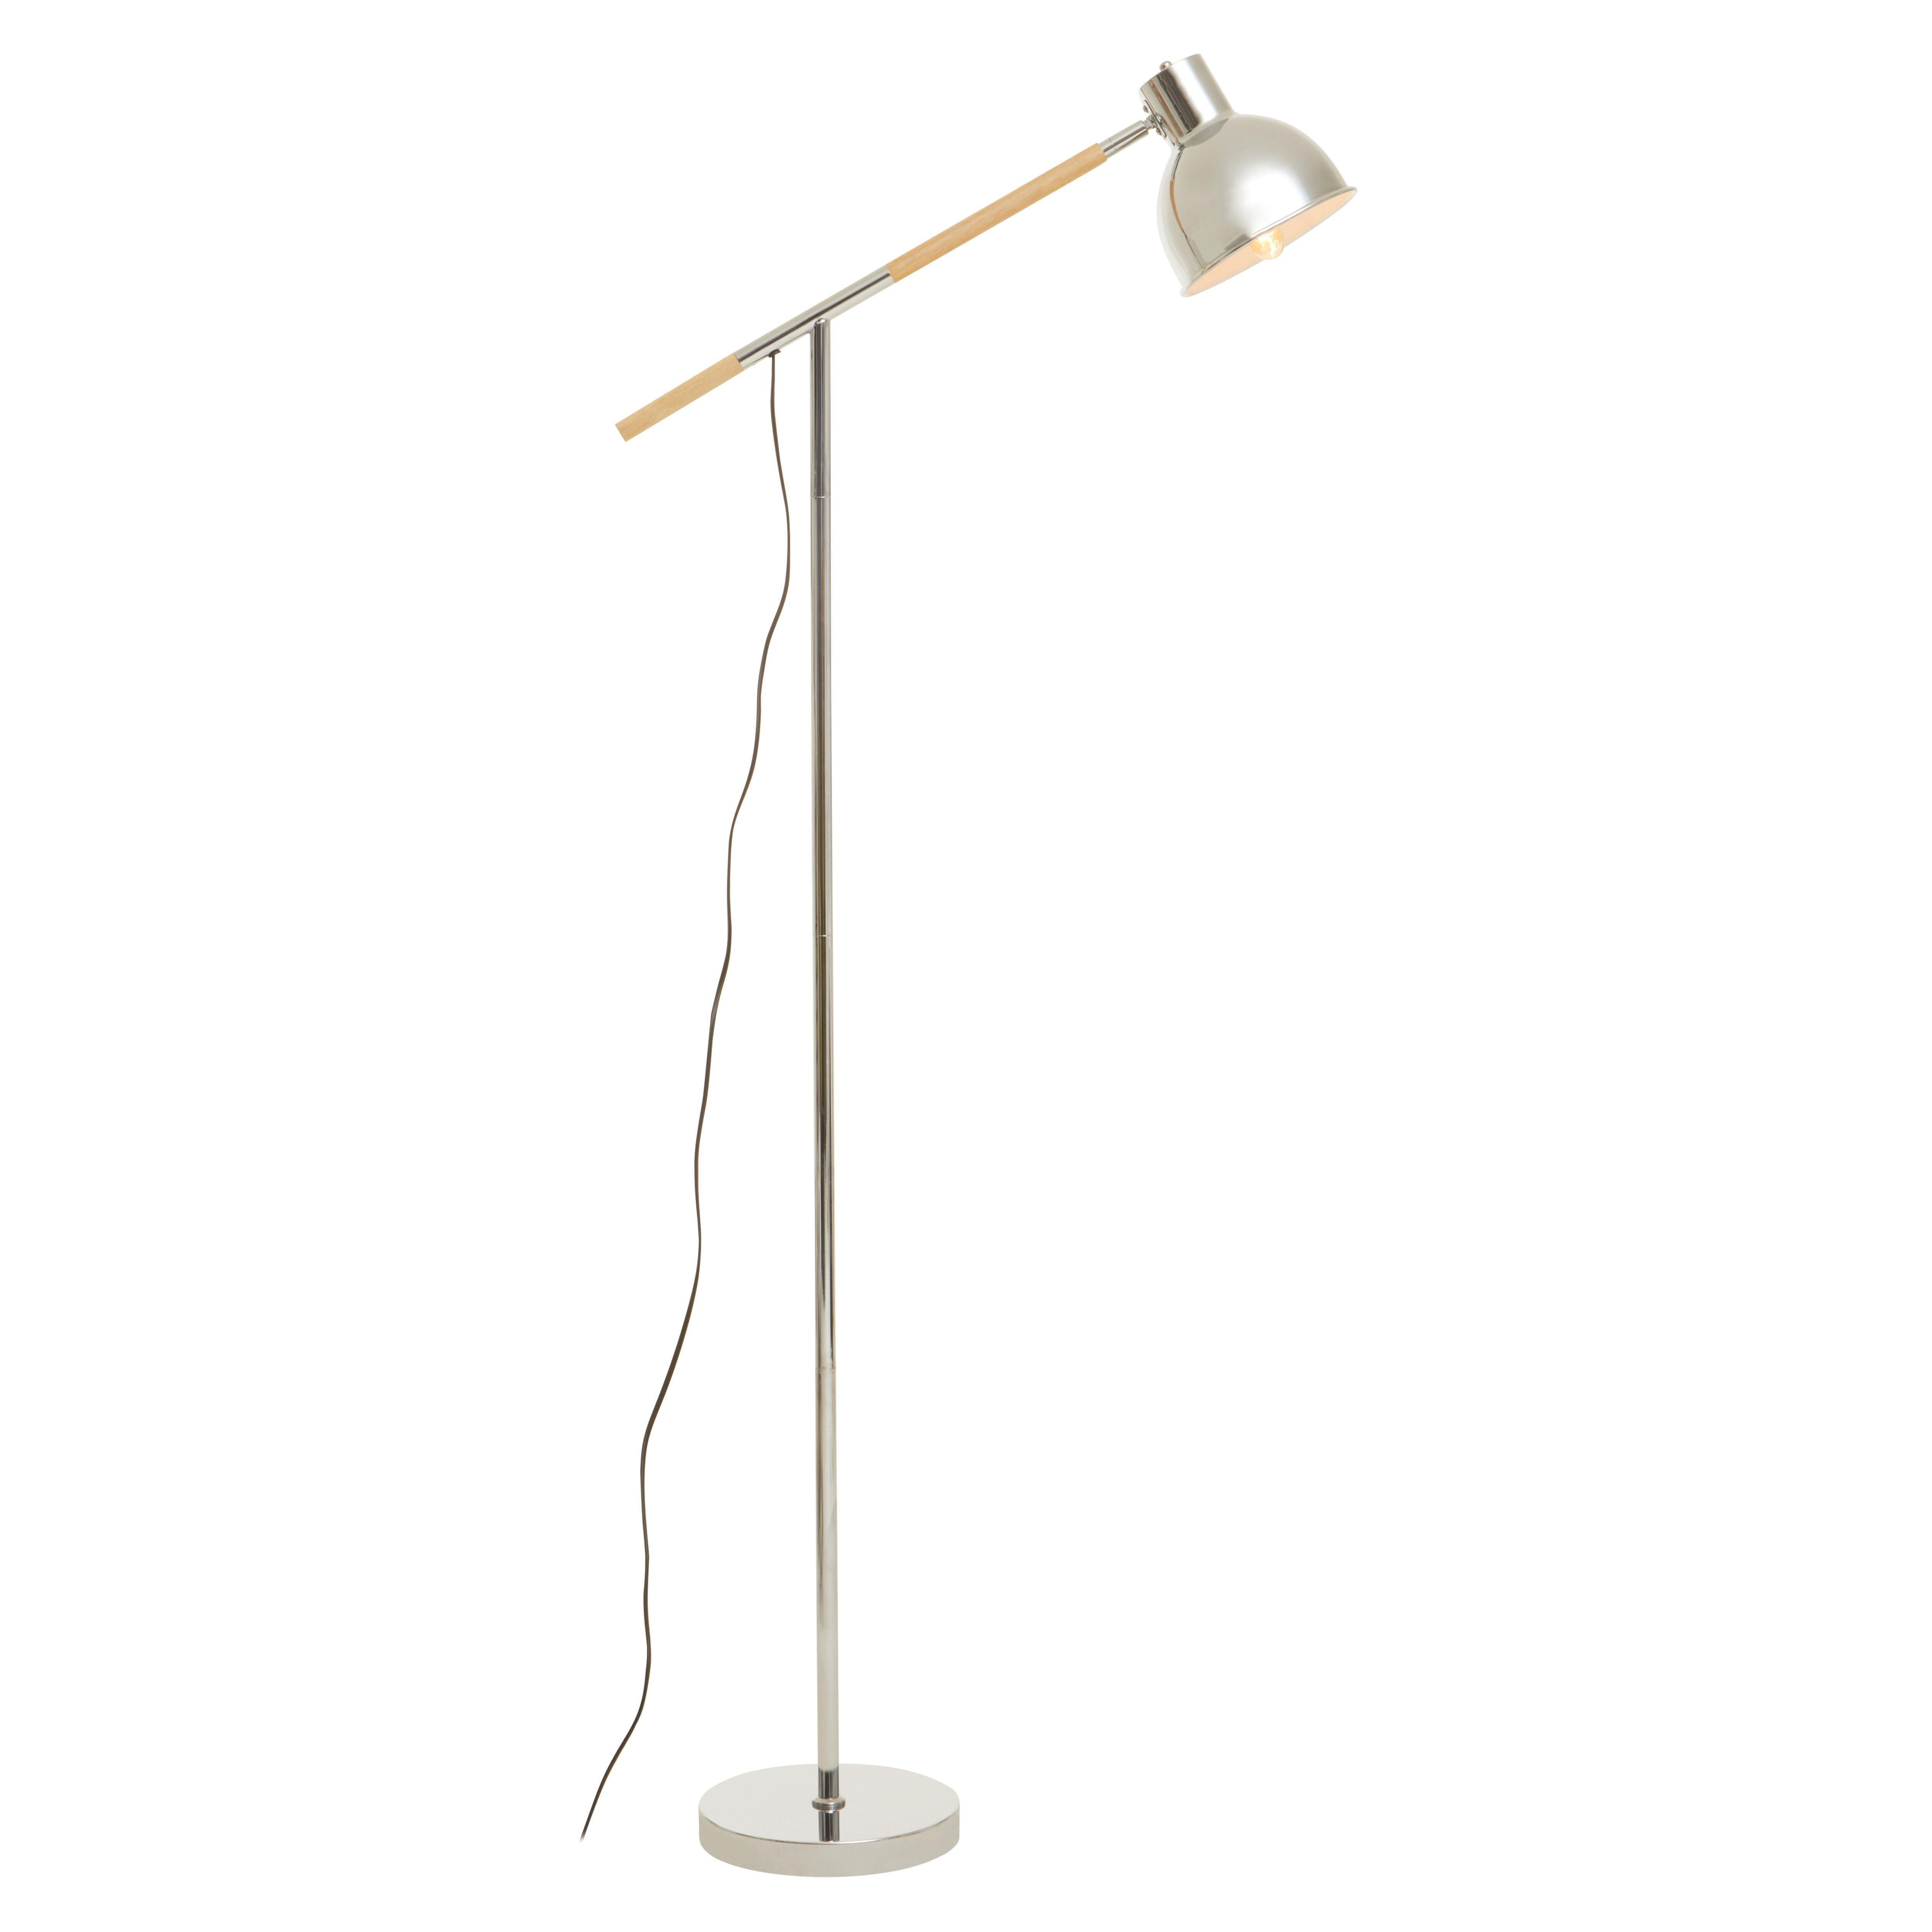 Interiors by Premier Adjustable Rotating Floor Lamp, Convenient Space-Saver - image 1